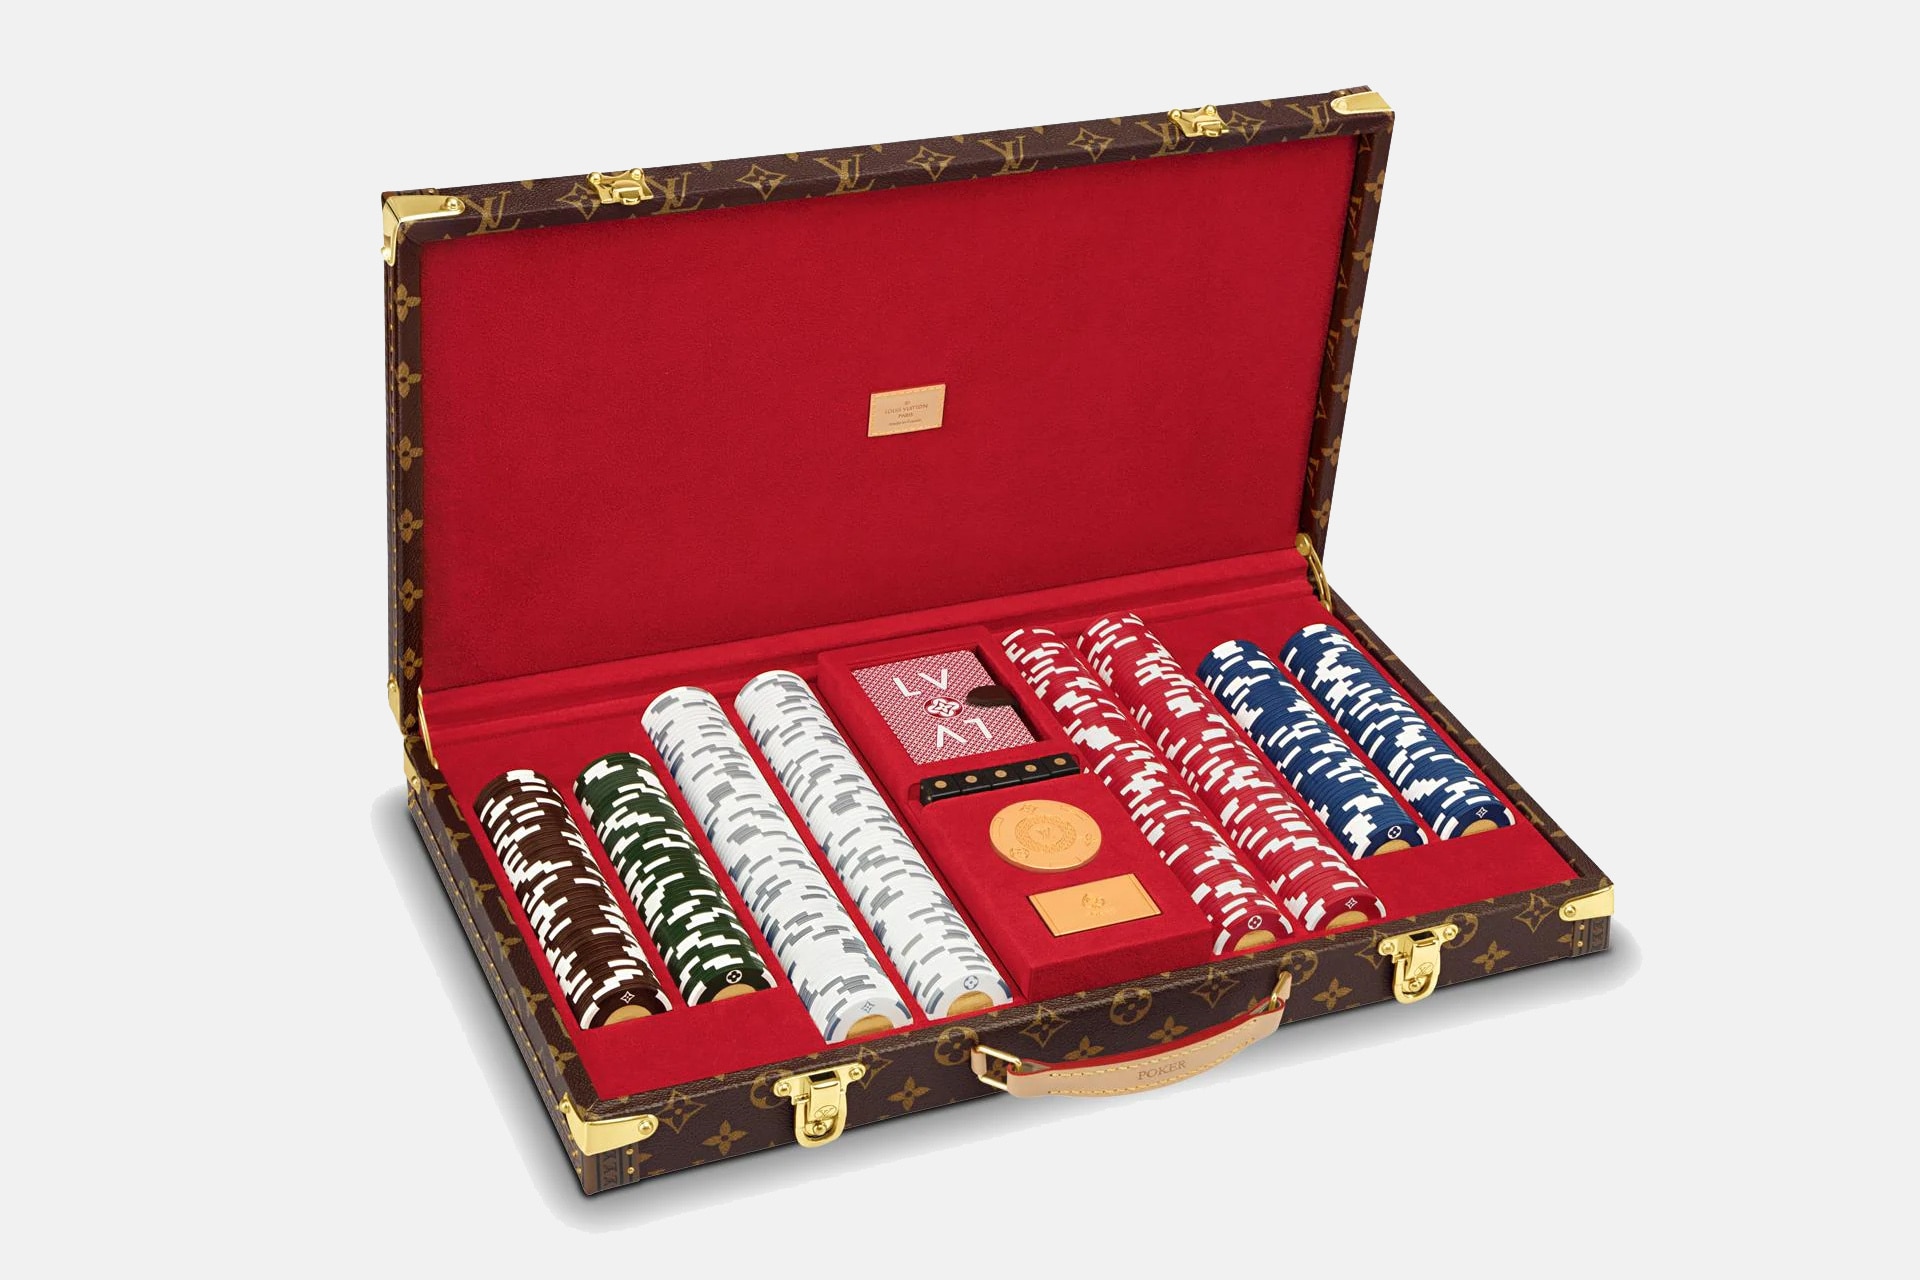 Go All In At Poker Night With Louis Vuitton's $242,000 Casino Trunk